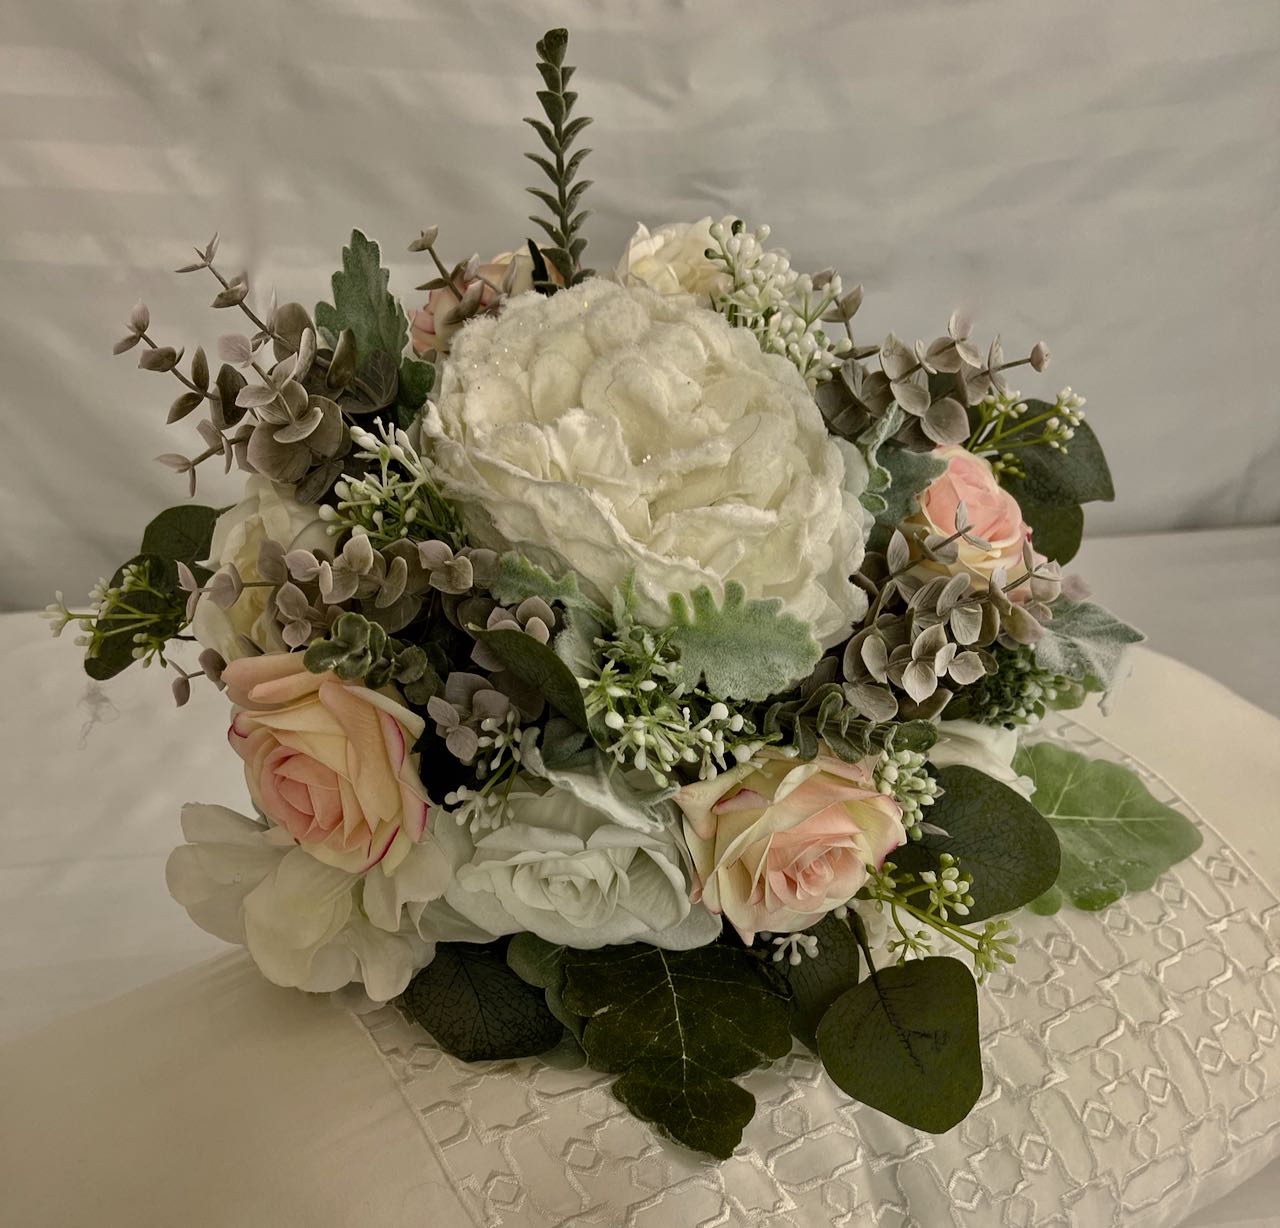 Bridal Bouquet- sage green eucalyptus  combined with white and blsuh pink roses - Rent for five days for $88.00